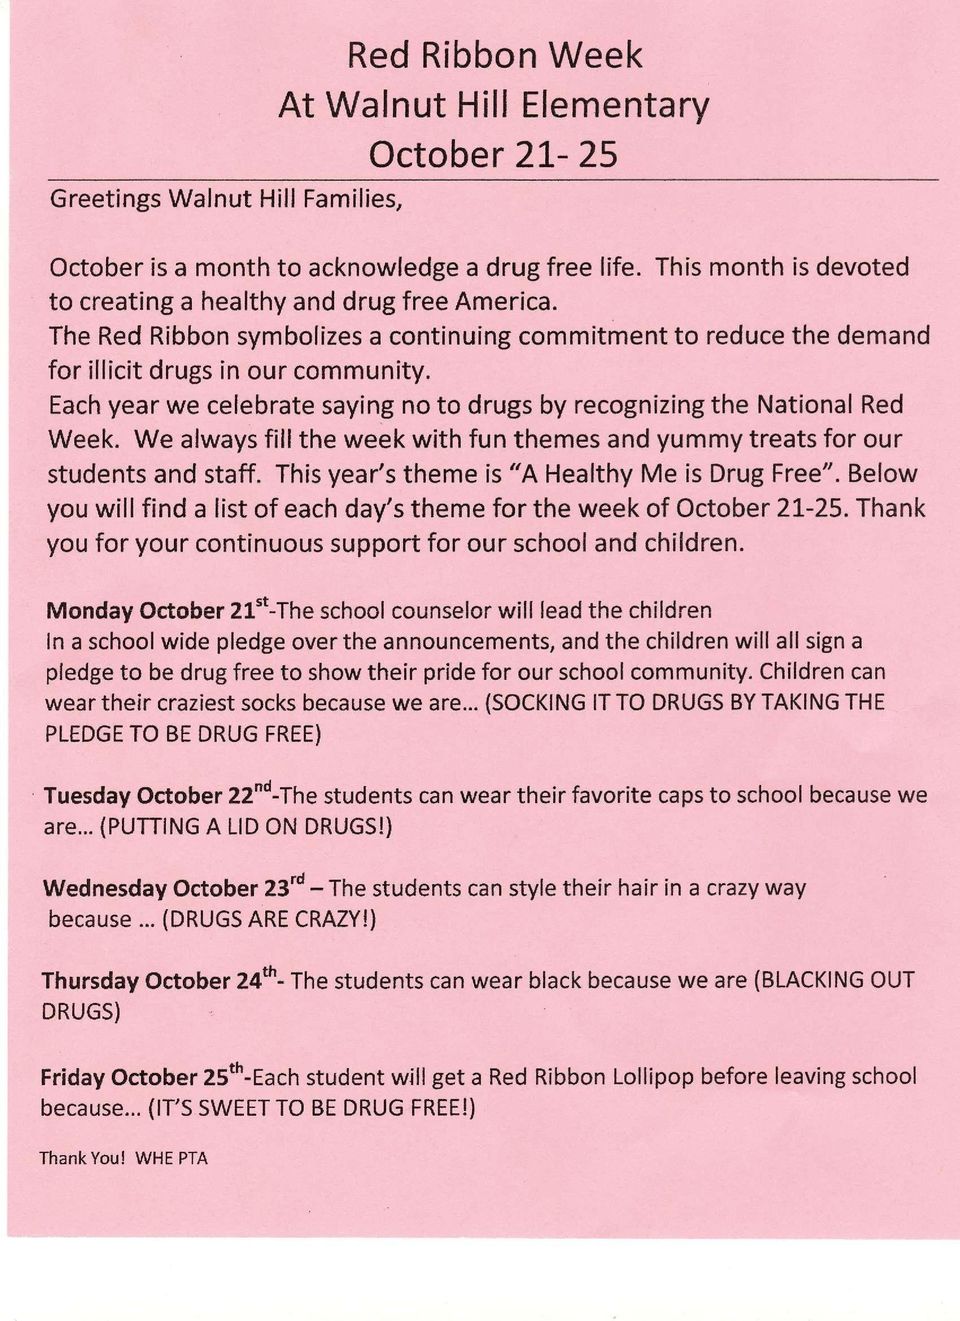 Each year we celebrate saying no to drugs by recognizing the National Red Week. We always fill the week with fun themes and yummy treats for our students and staff.